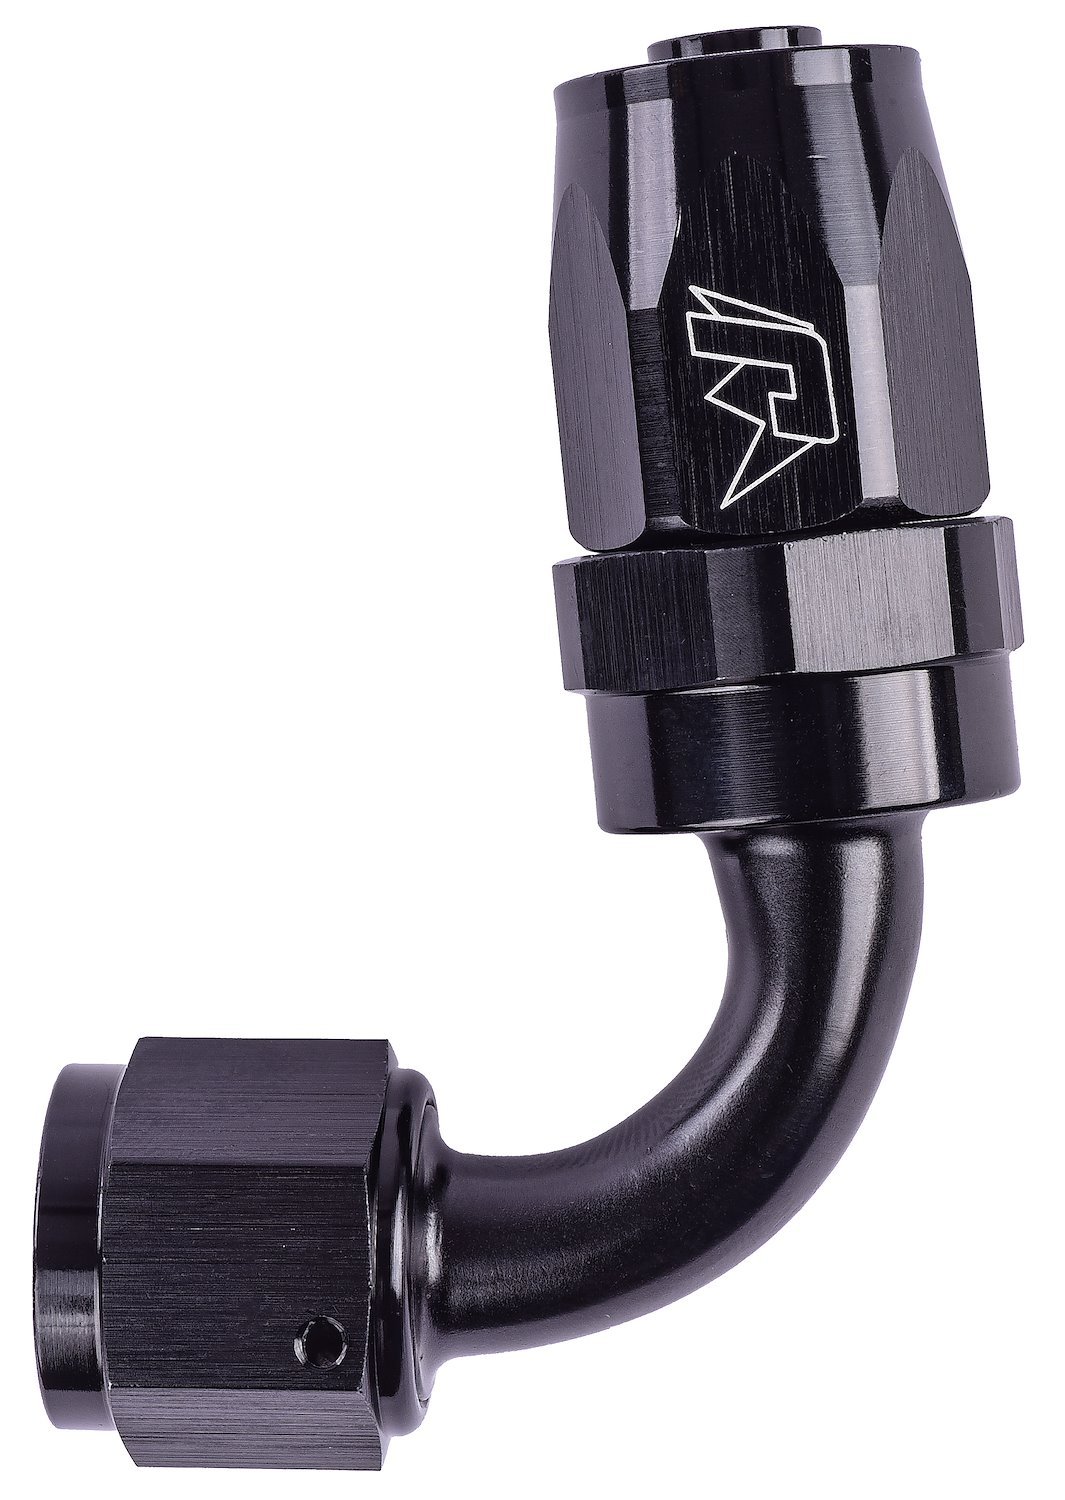 AN 90-Degree Max Flow Swivel Hose End [-8